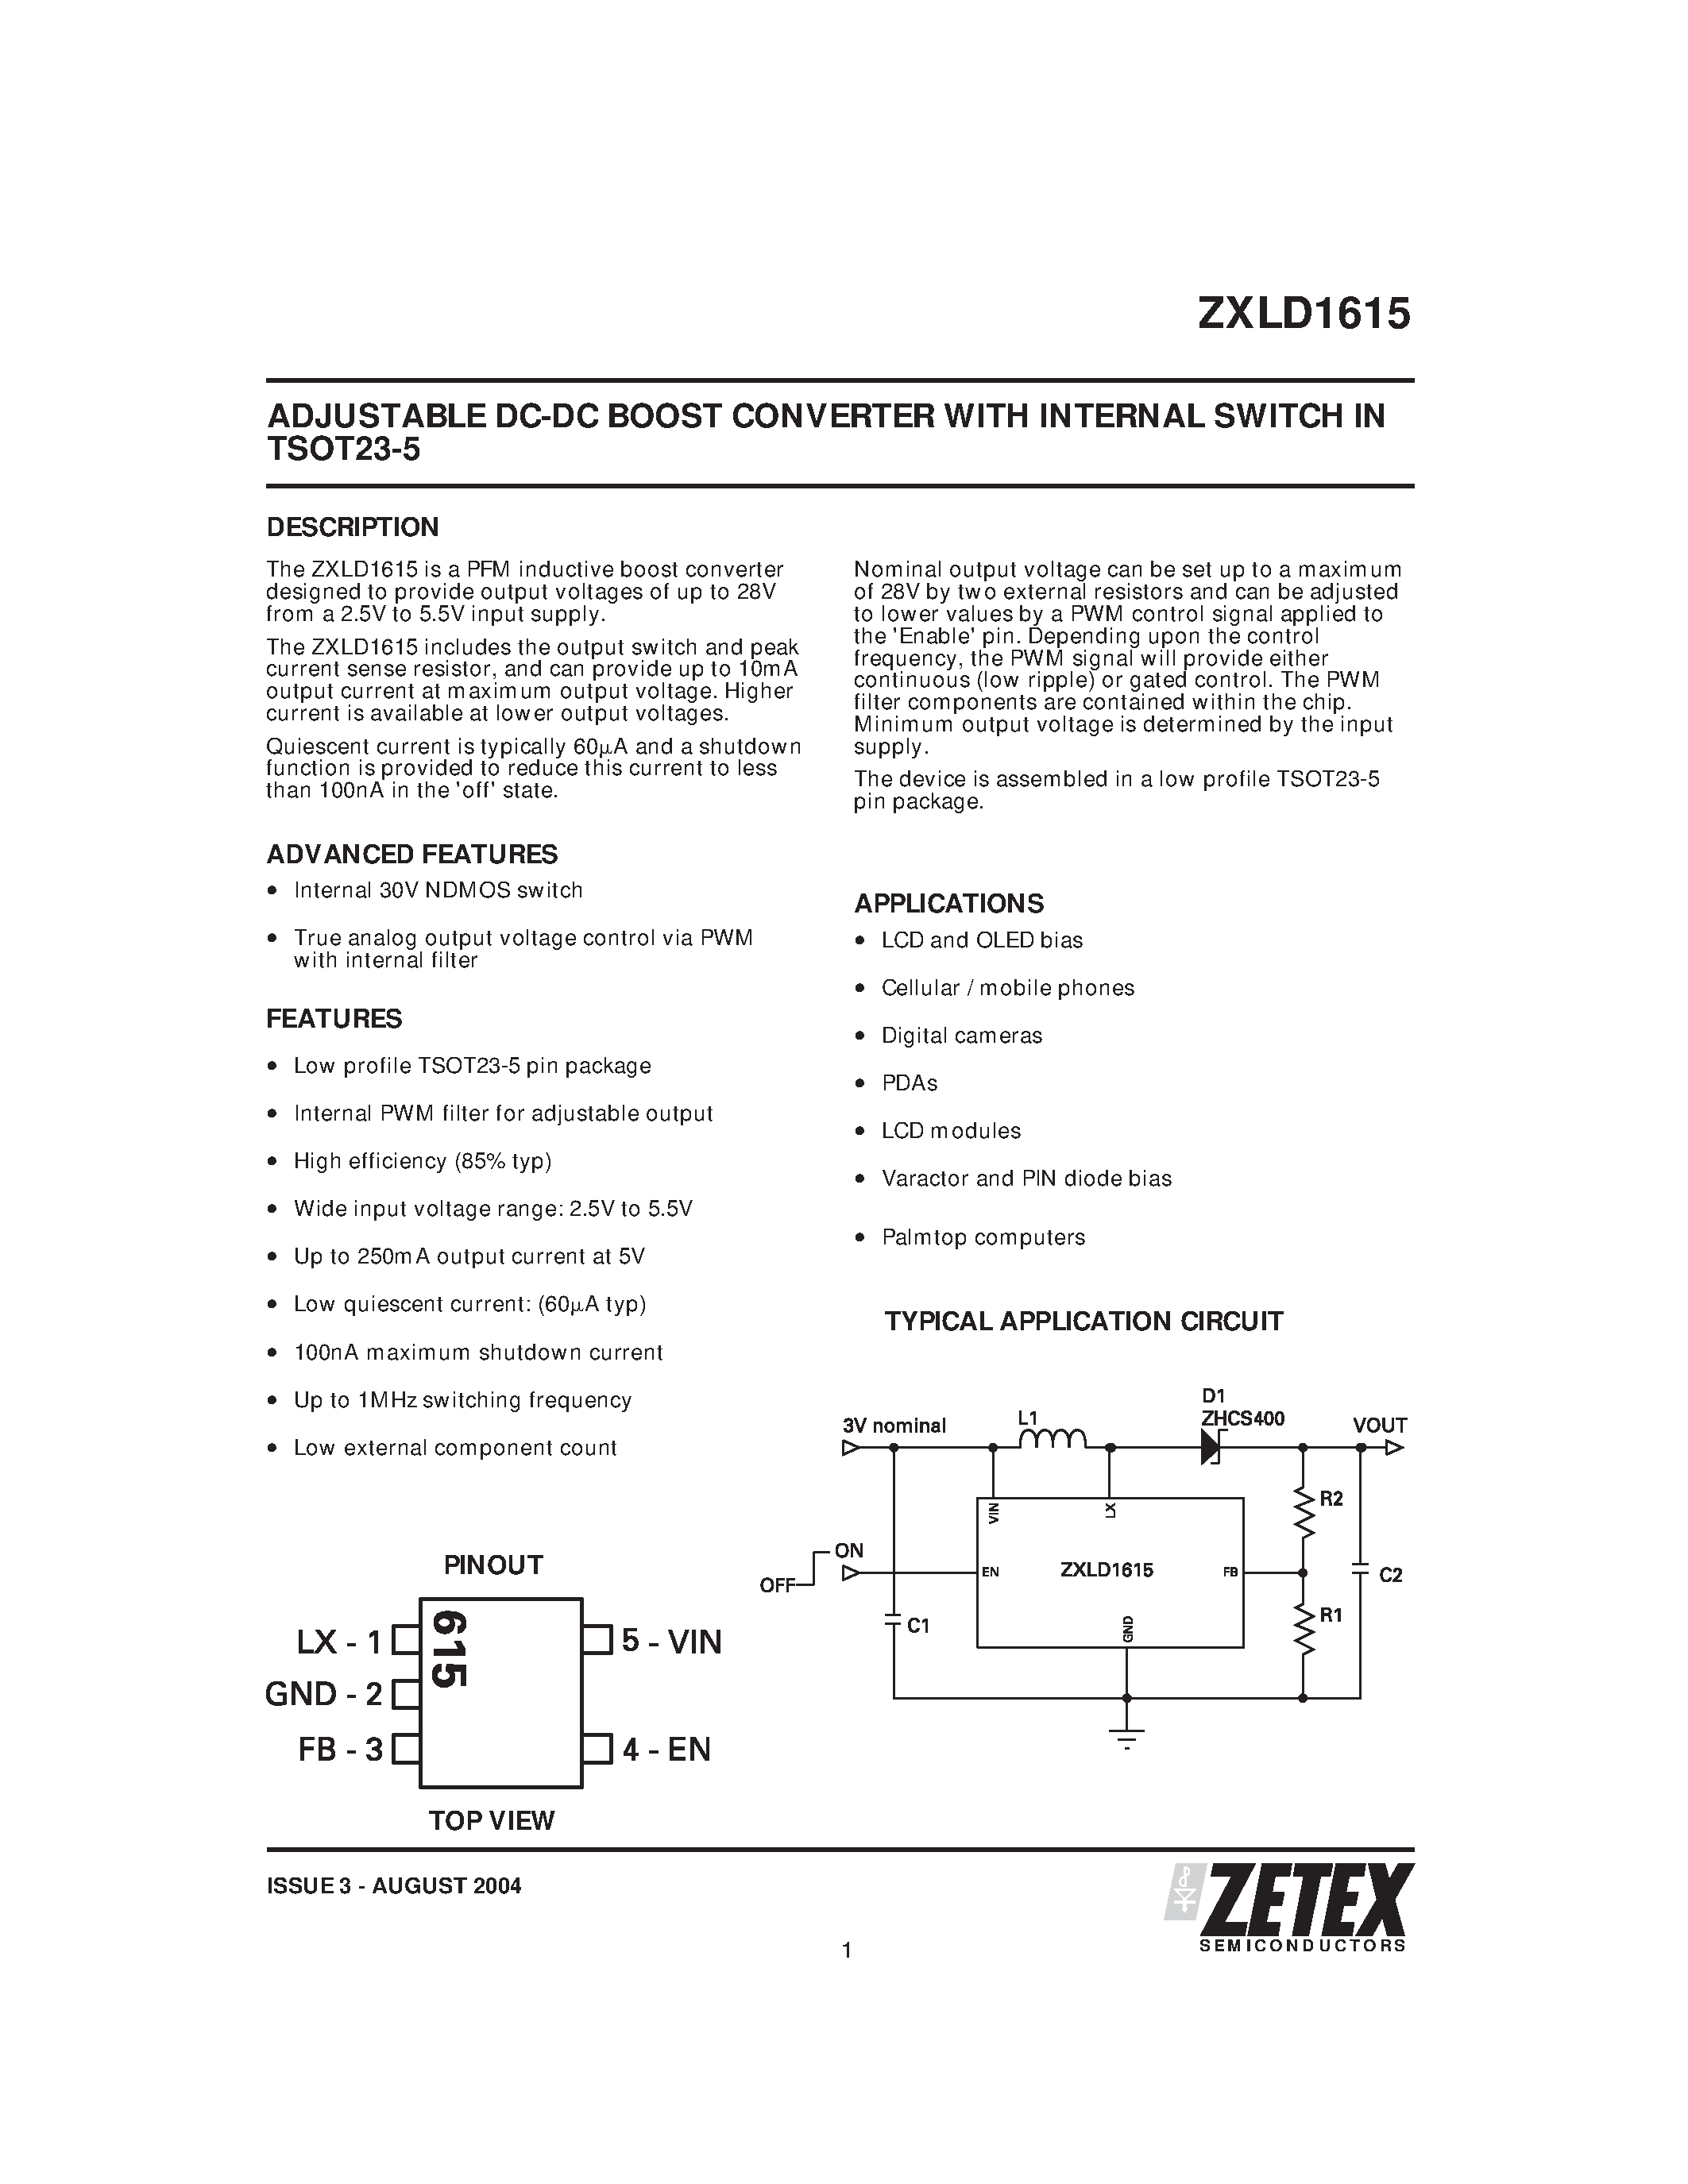 Datasheet ZXLD1615 - ADJUSTABLE DC-DC BOOST CONVERTER WITH INTERNAL SWITCH IN TSOT23-5 page 1